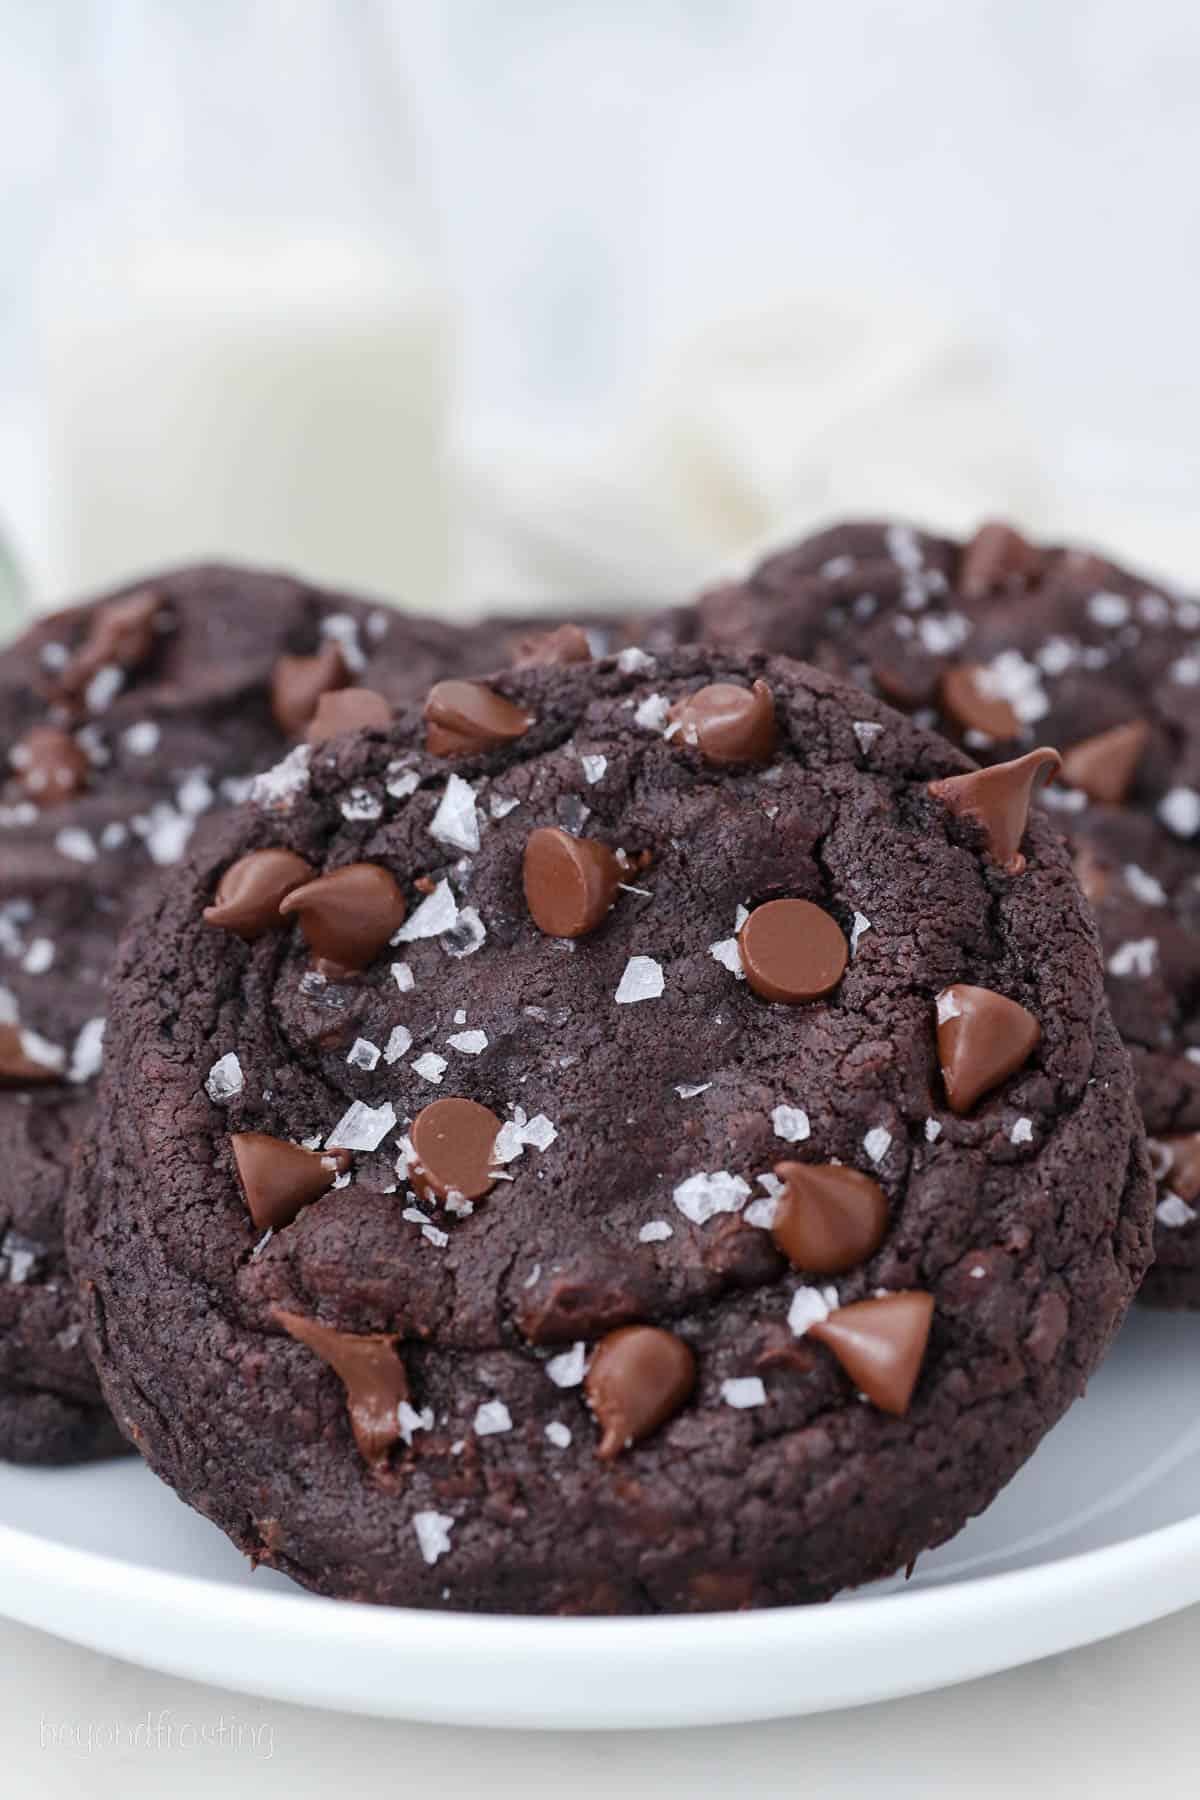 Giant chocolate cookies topped with flaked seas salt on a white plate.